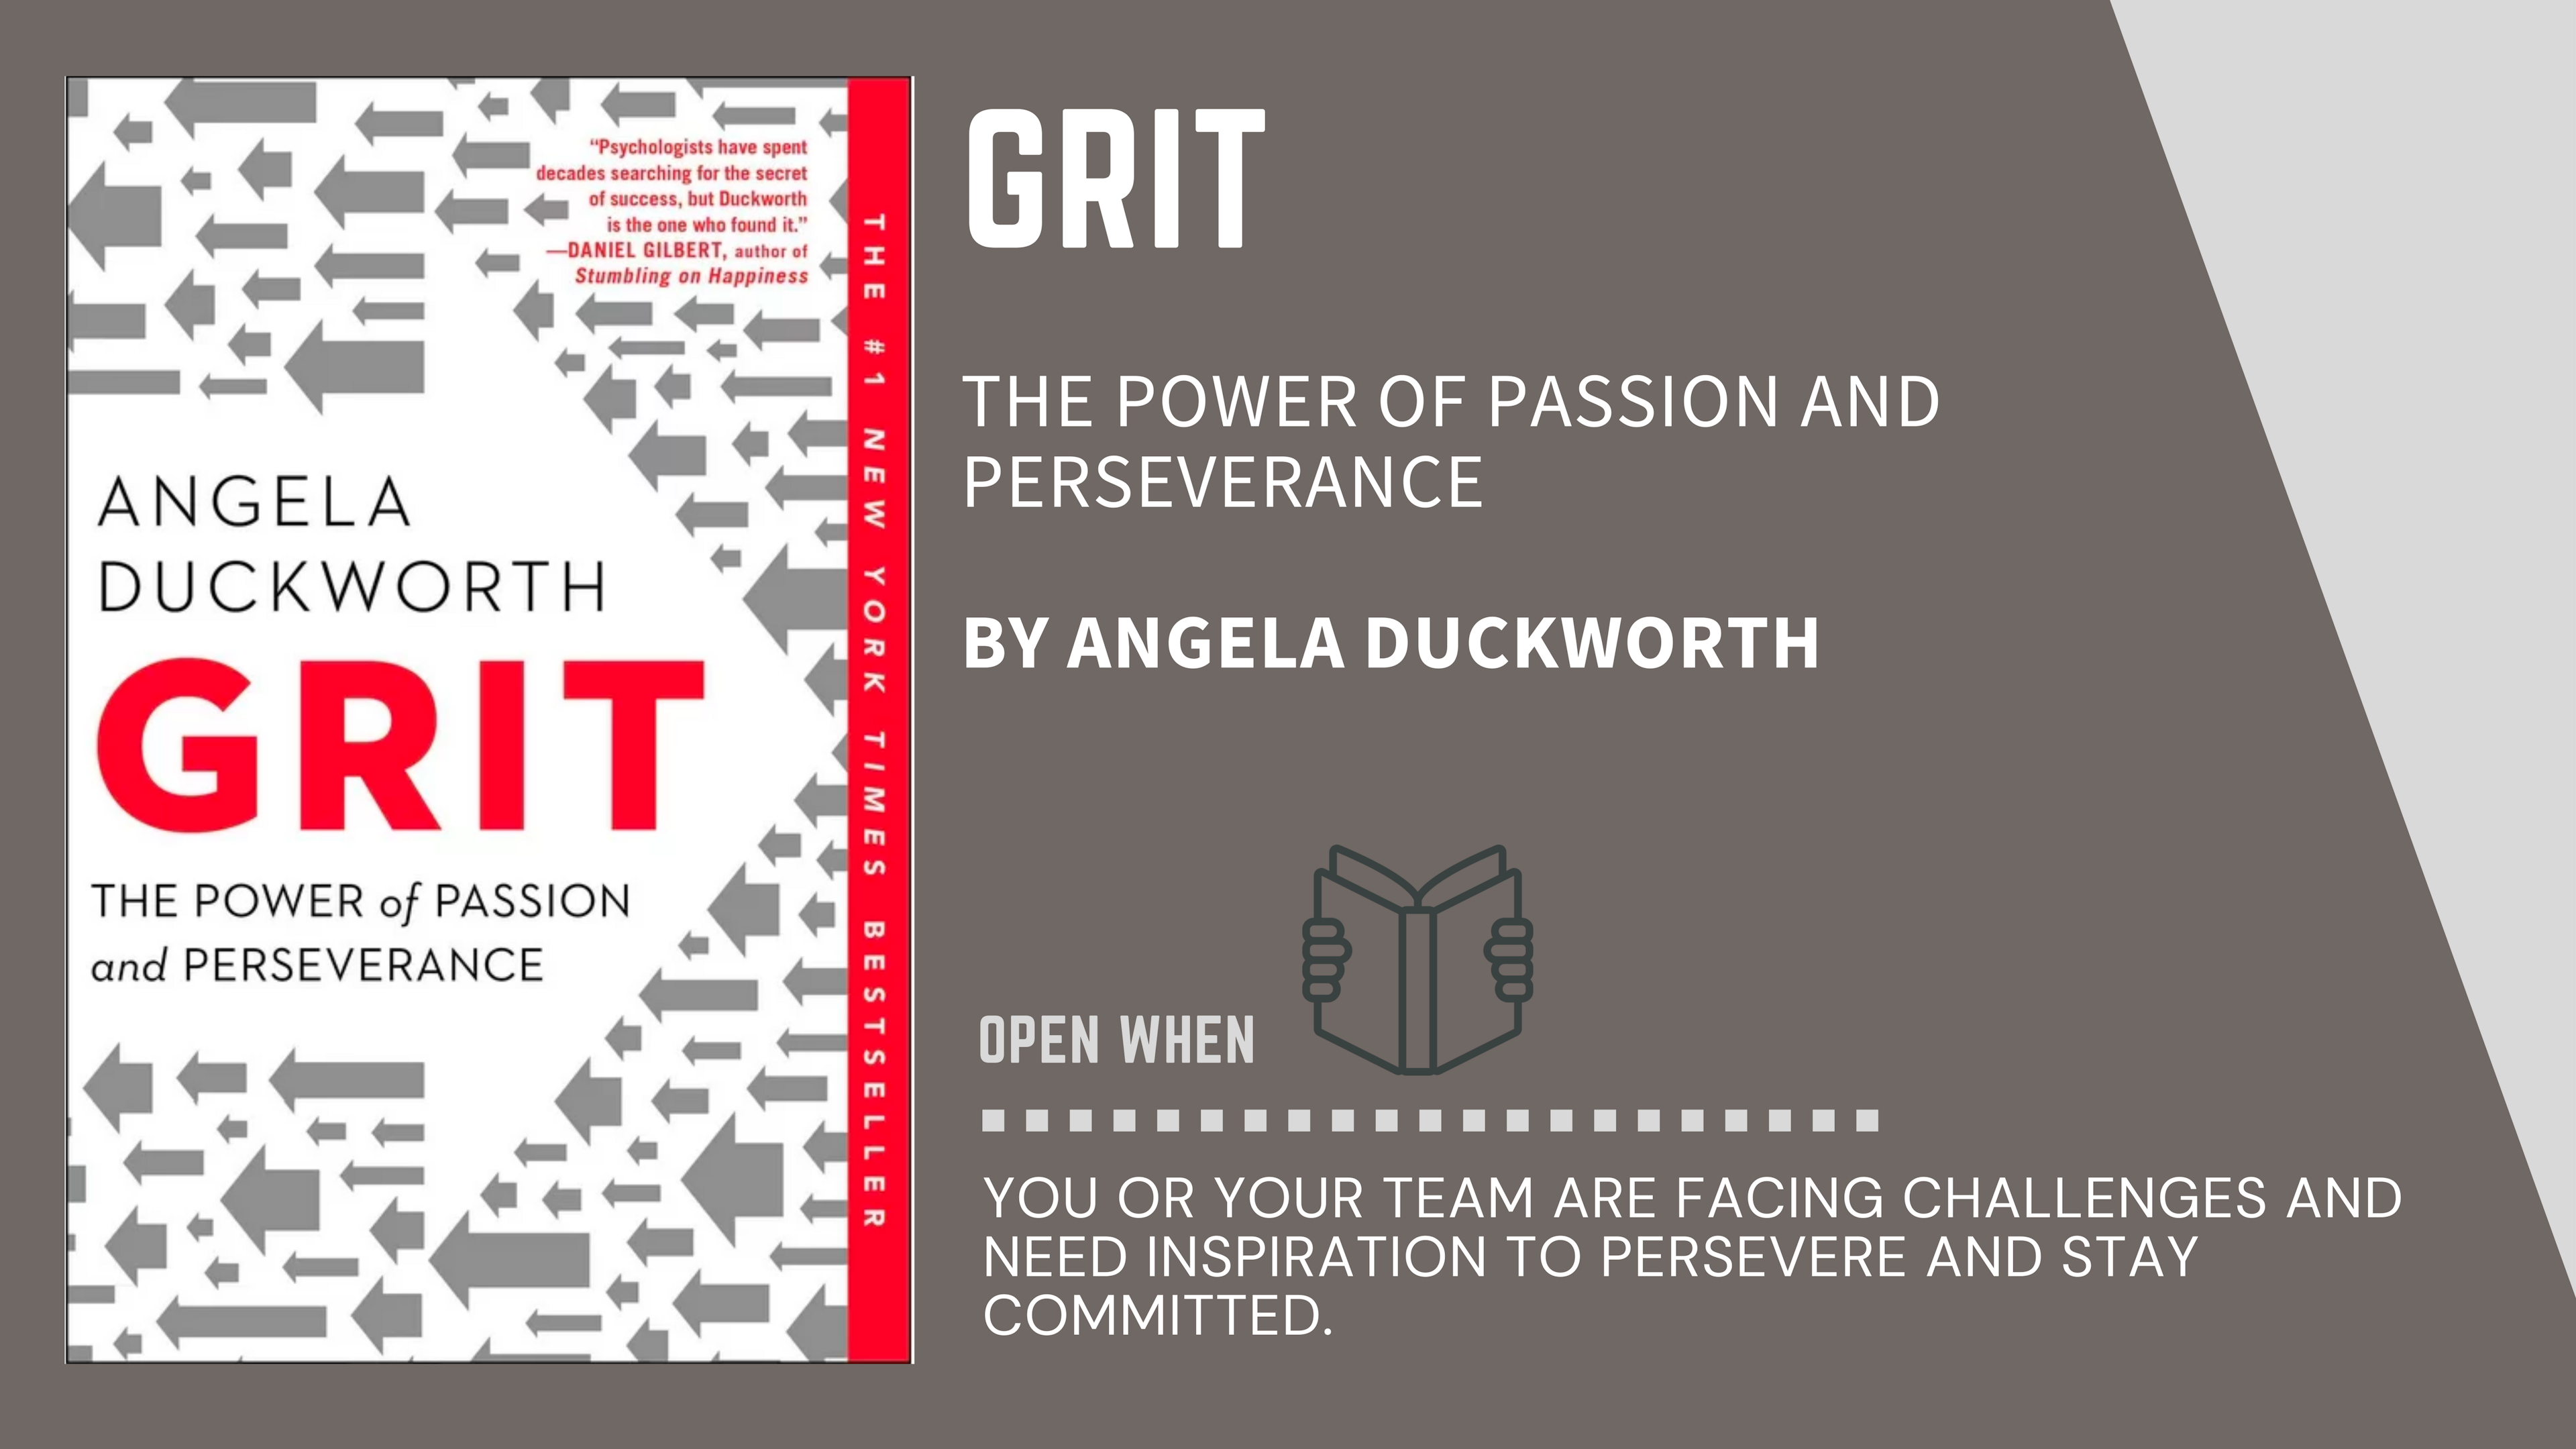 Book Cover of "Grit" by Angela Duckworth